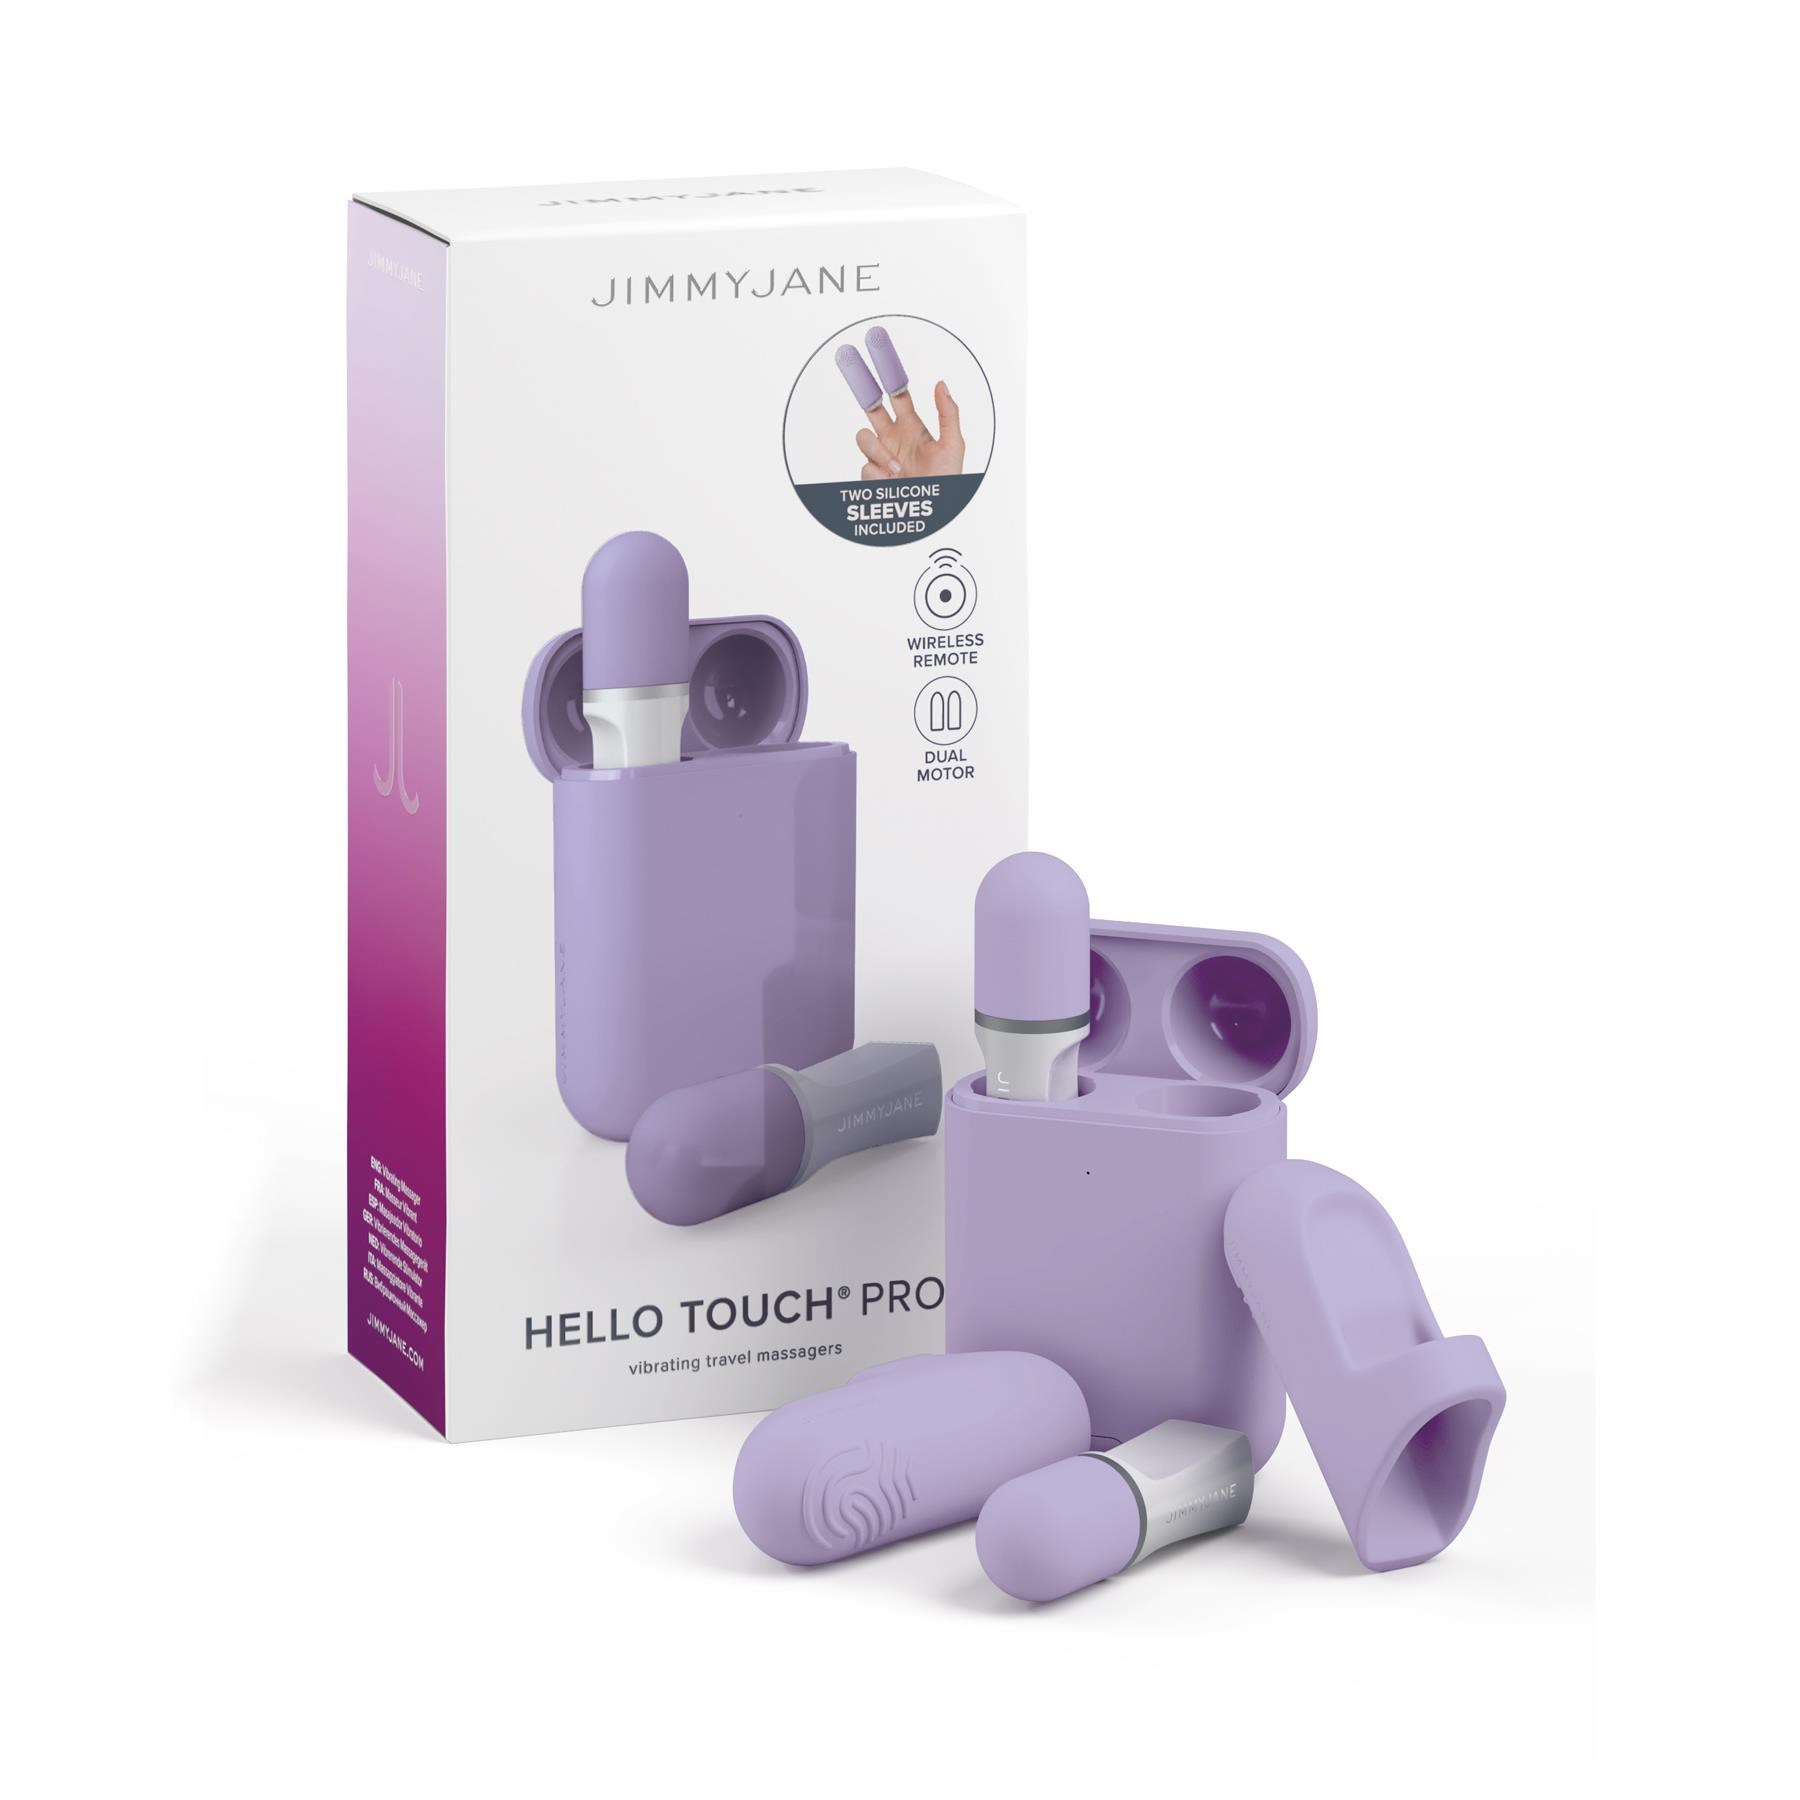 Jimmy Jane Hello Touch Pro Finger Vibrators - Product and Packaging